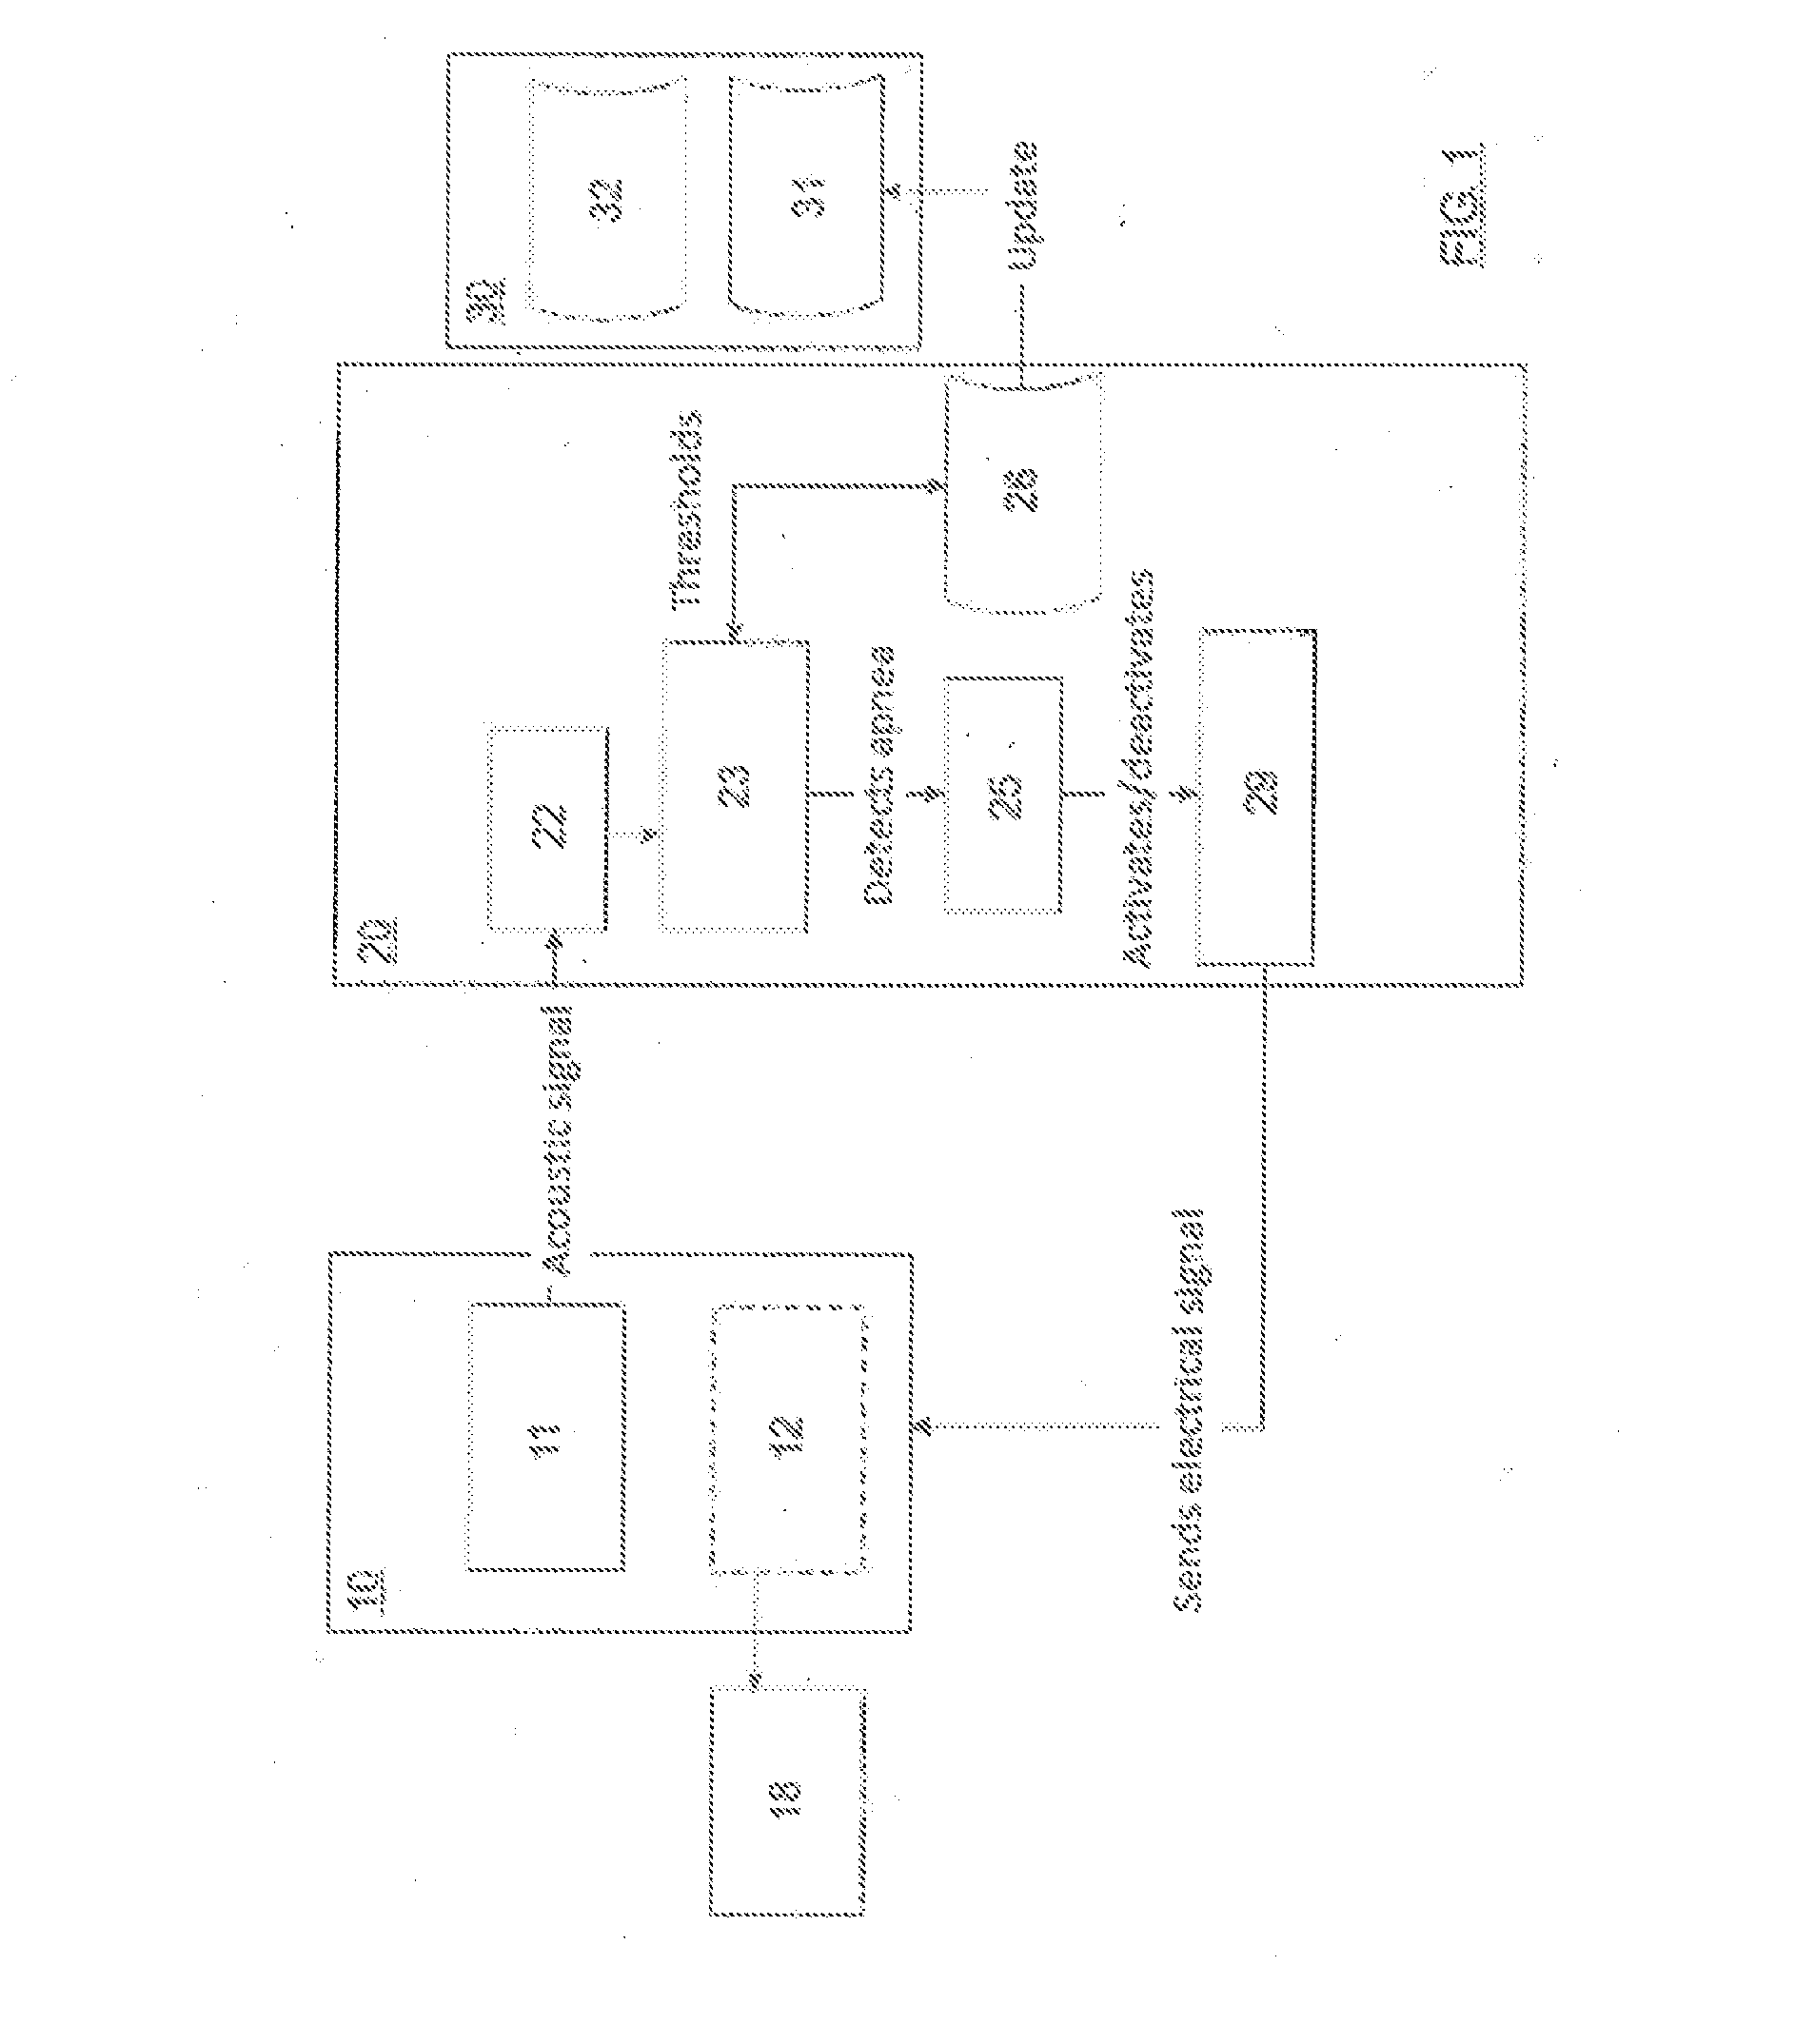 Electrostimulation method and system for the treatment of sleep apnea